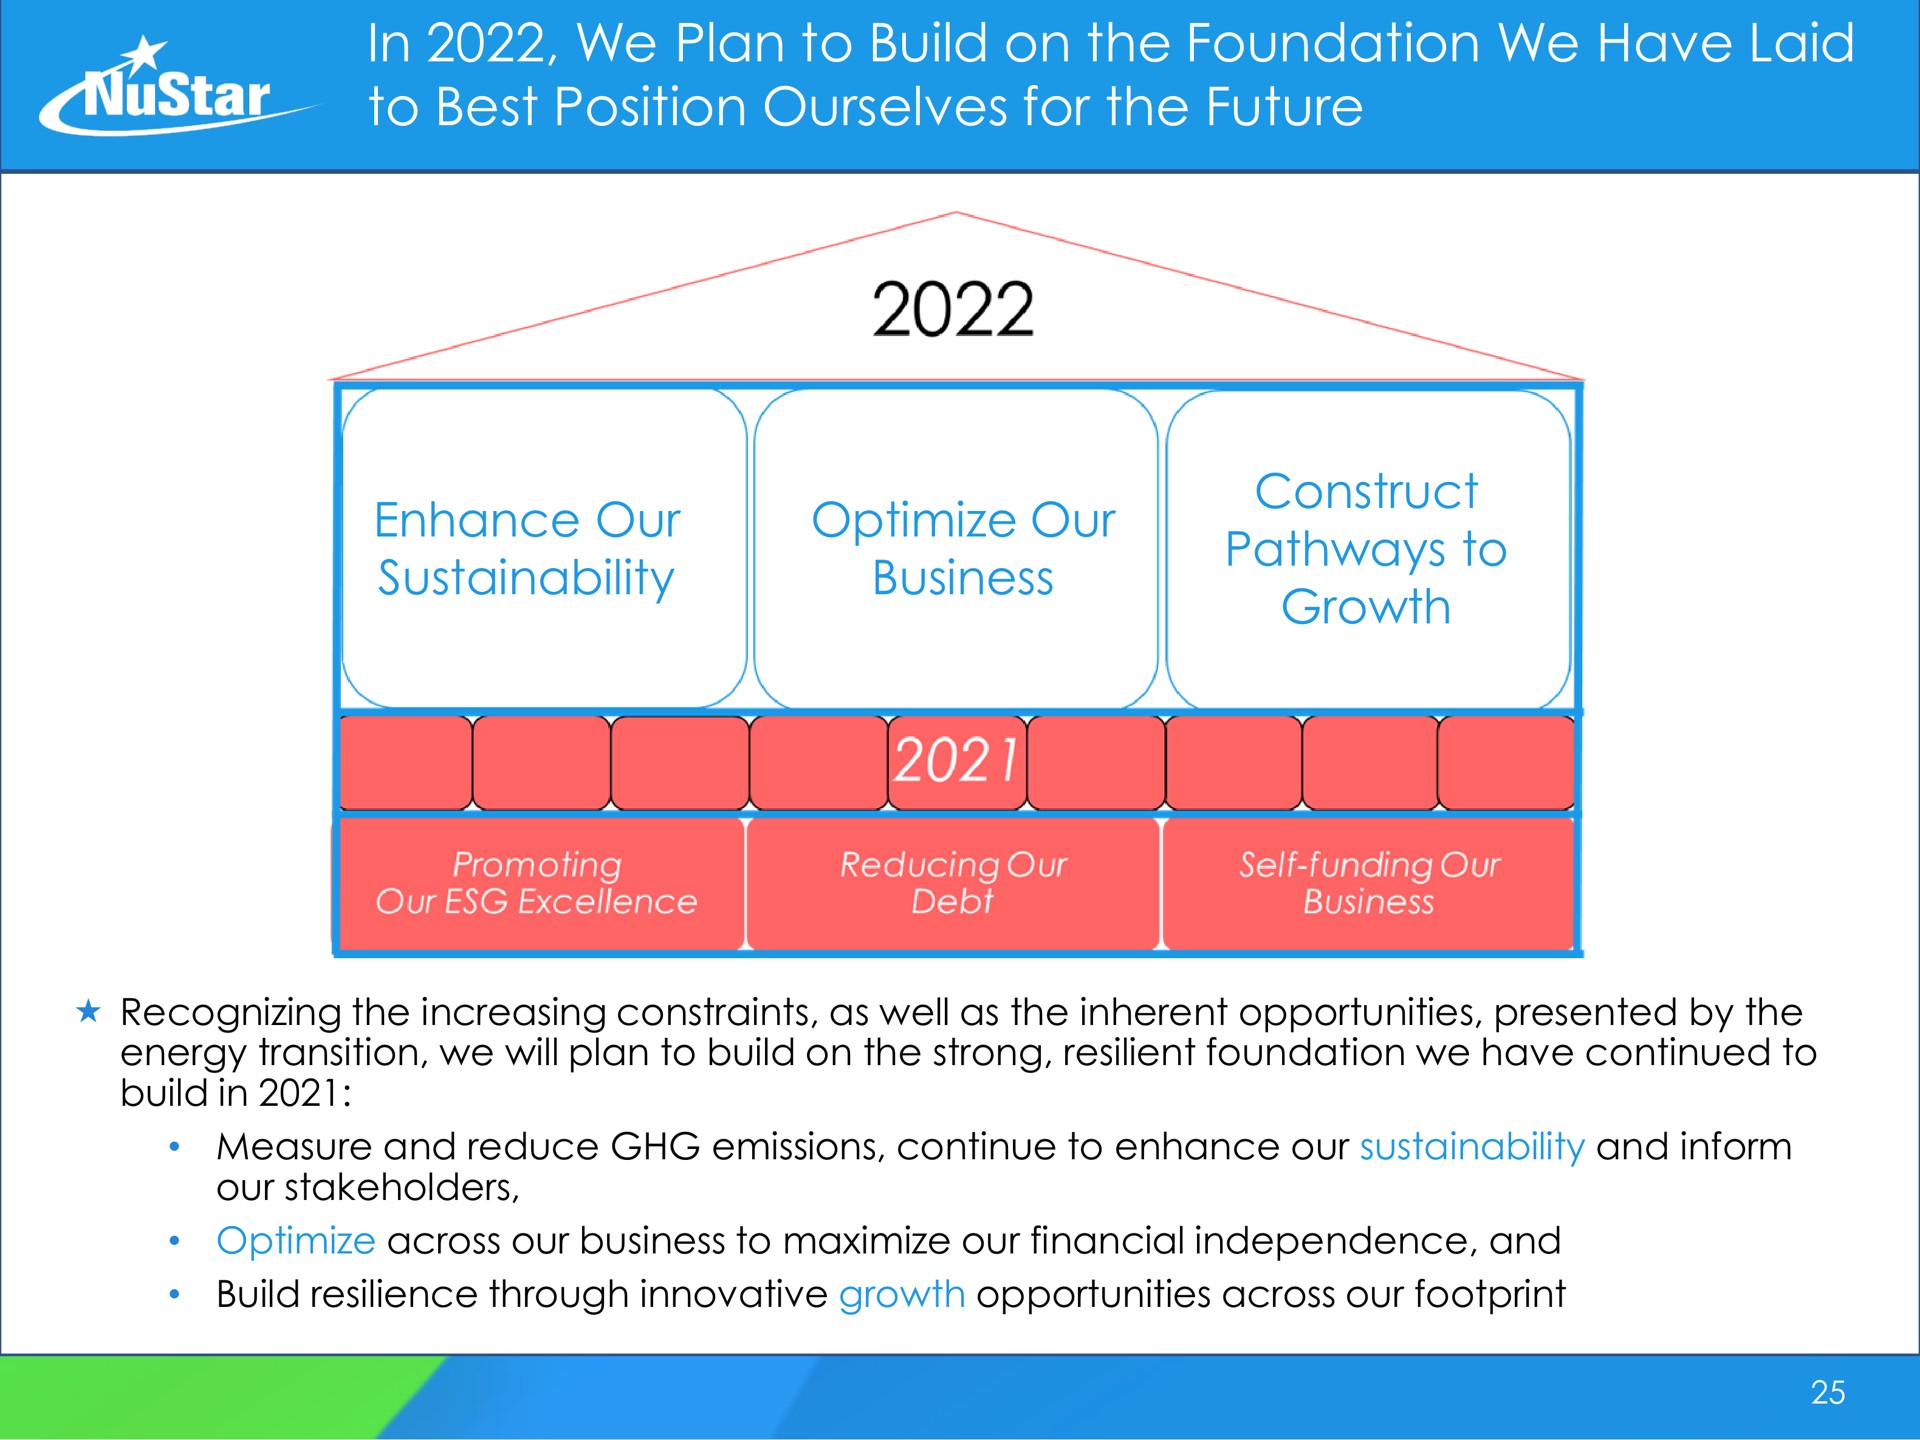 in we plan to build on the foundation we have laid to best position ourselves for the future enhance our optimize our business construct pathways to growth pst ceases | NuStar Energy